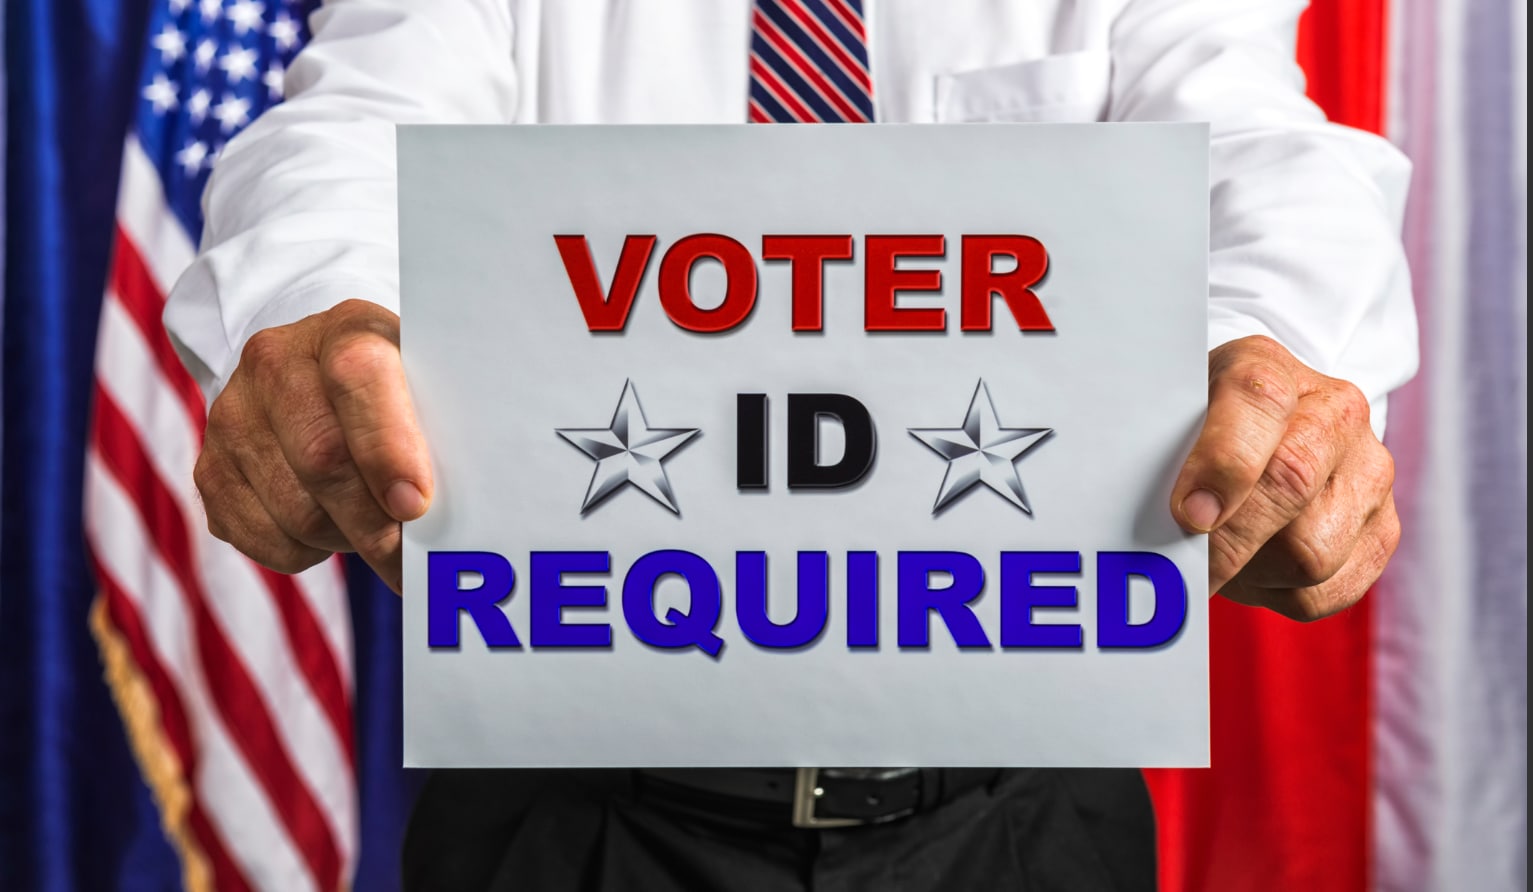 Man holding "Voter ID Required" sign